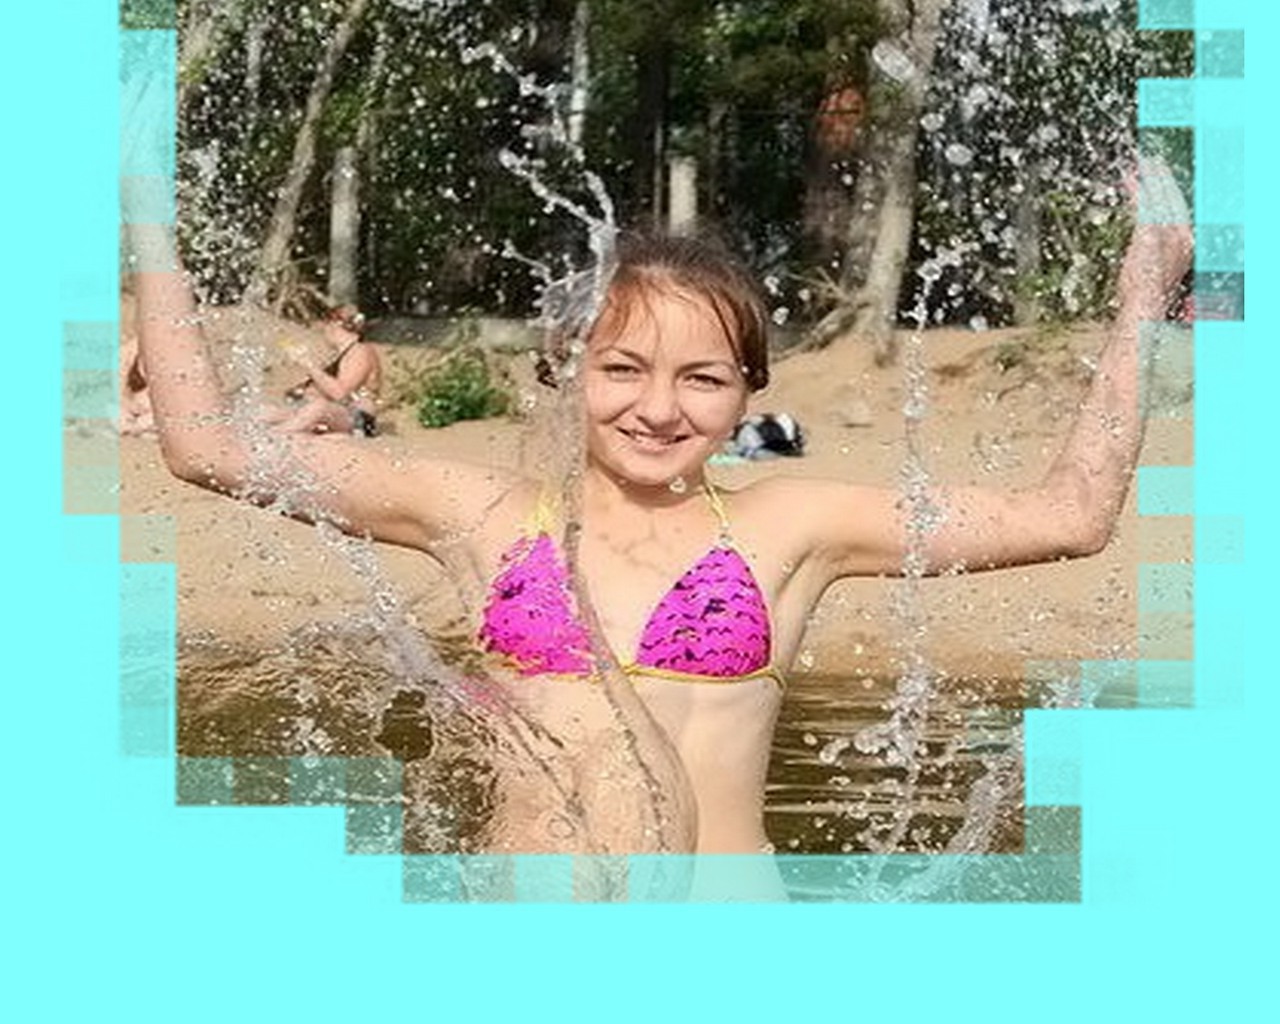 on vacation summer water wet relaxation fun leisure swimming pool nature happiness beautiful girl child woman outdoors young enjoyment joy lifestyle cheerful